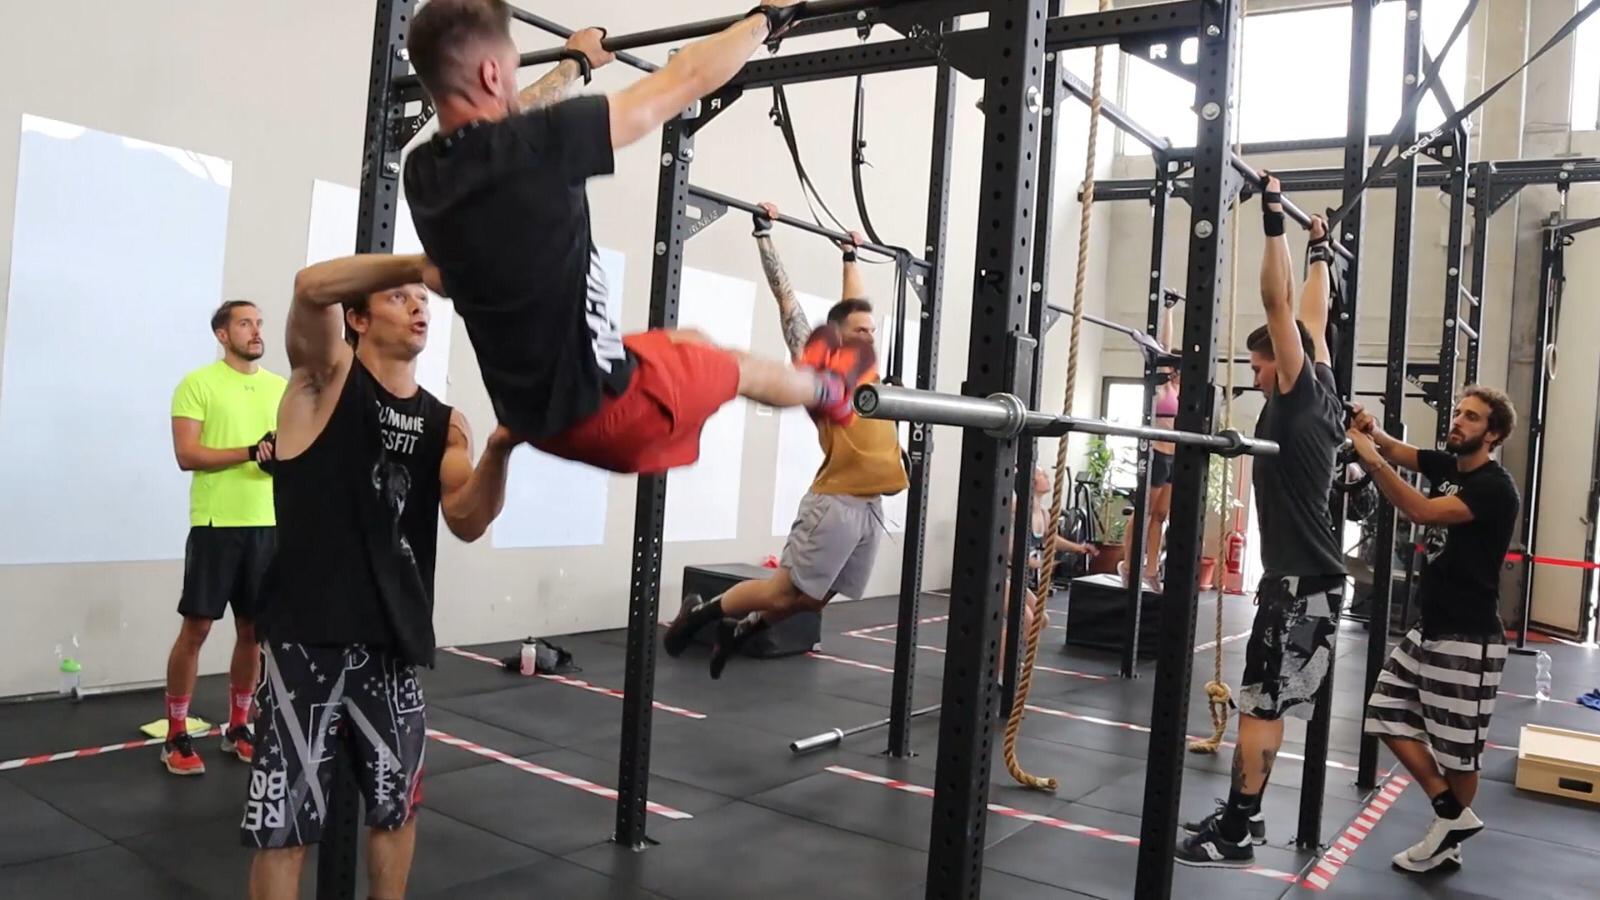 ALLENAMENTO EVENTO CROSSFIT KIPPING MUSCLE UP